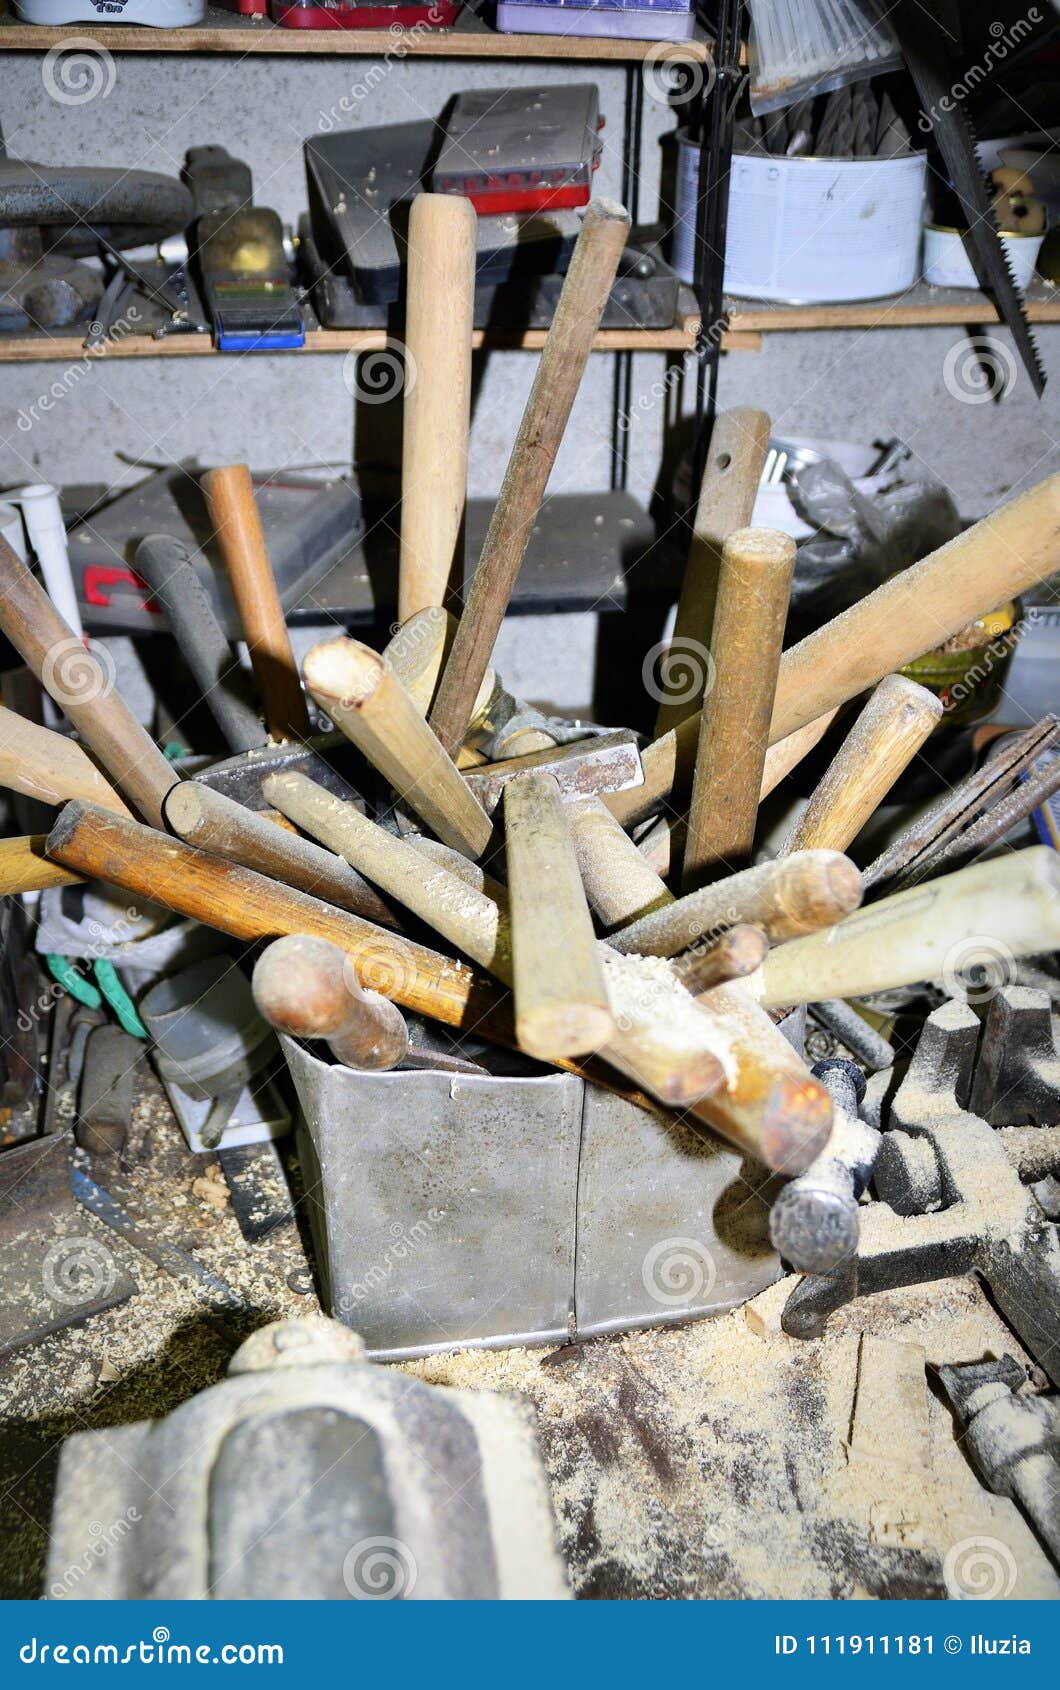 work table of a carpenter with many tools olds hanging